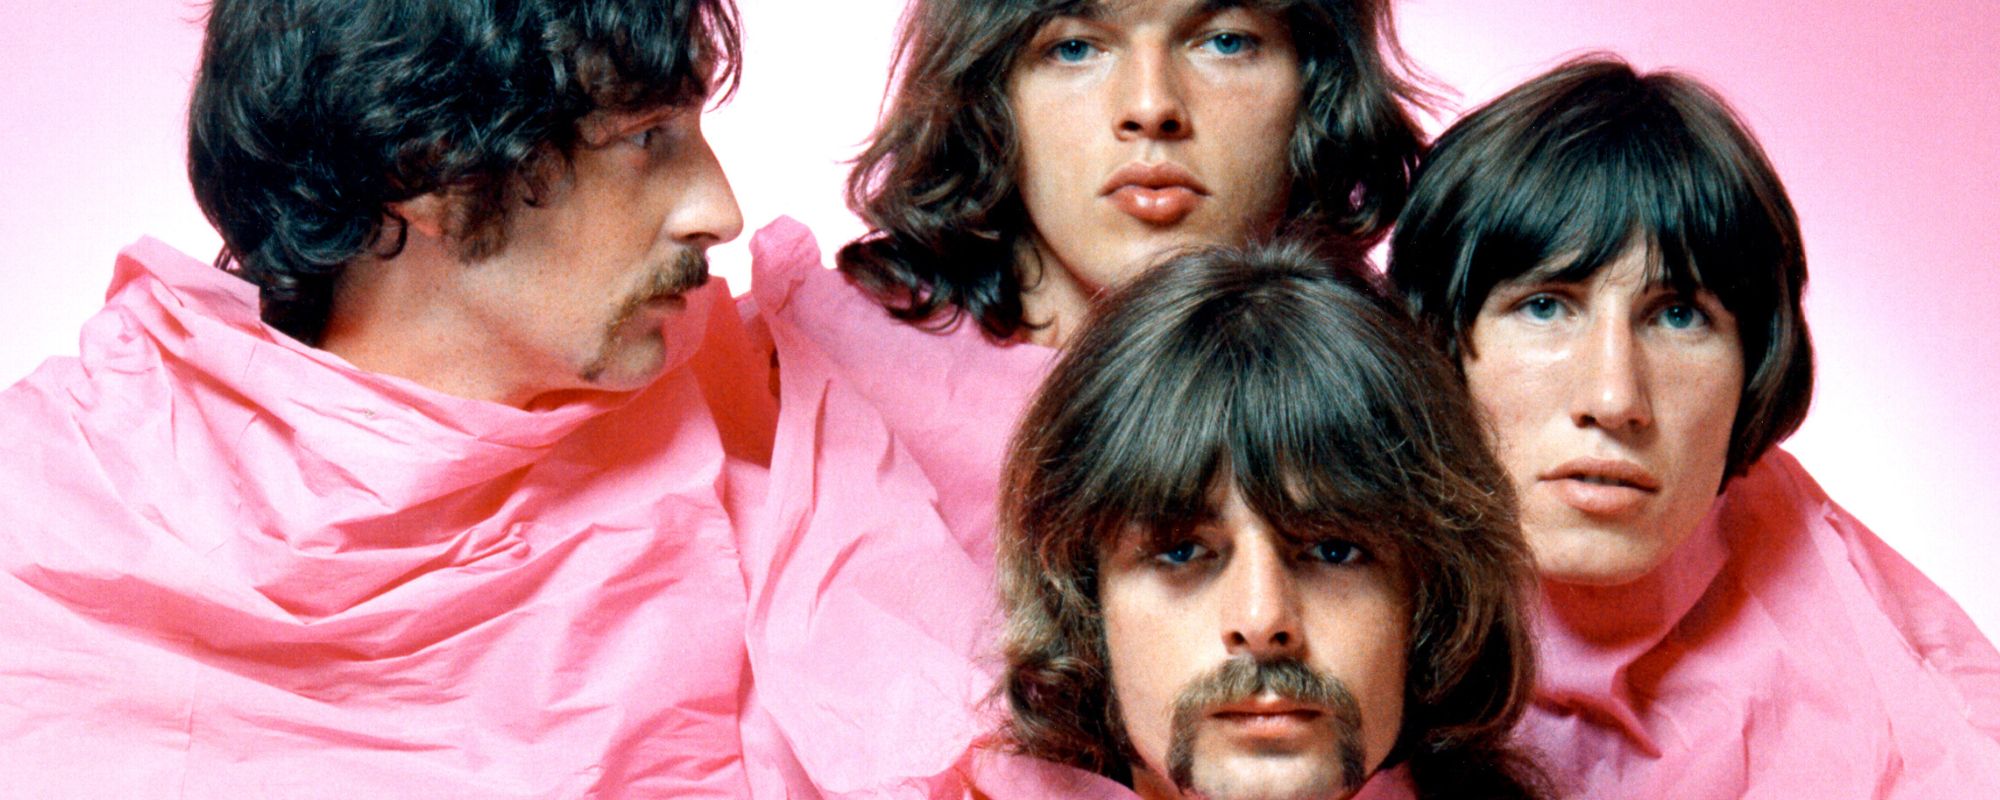 3 Songs For People Who Say They Don’t Like Pink Floyd